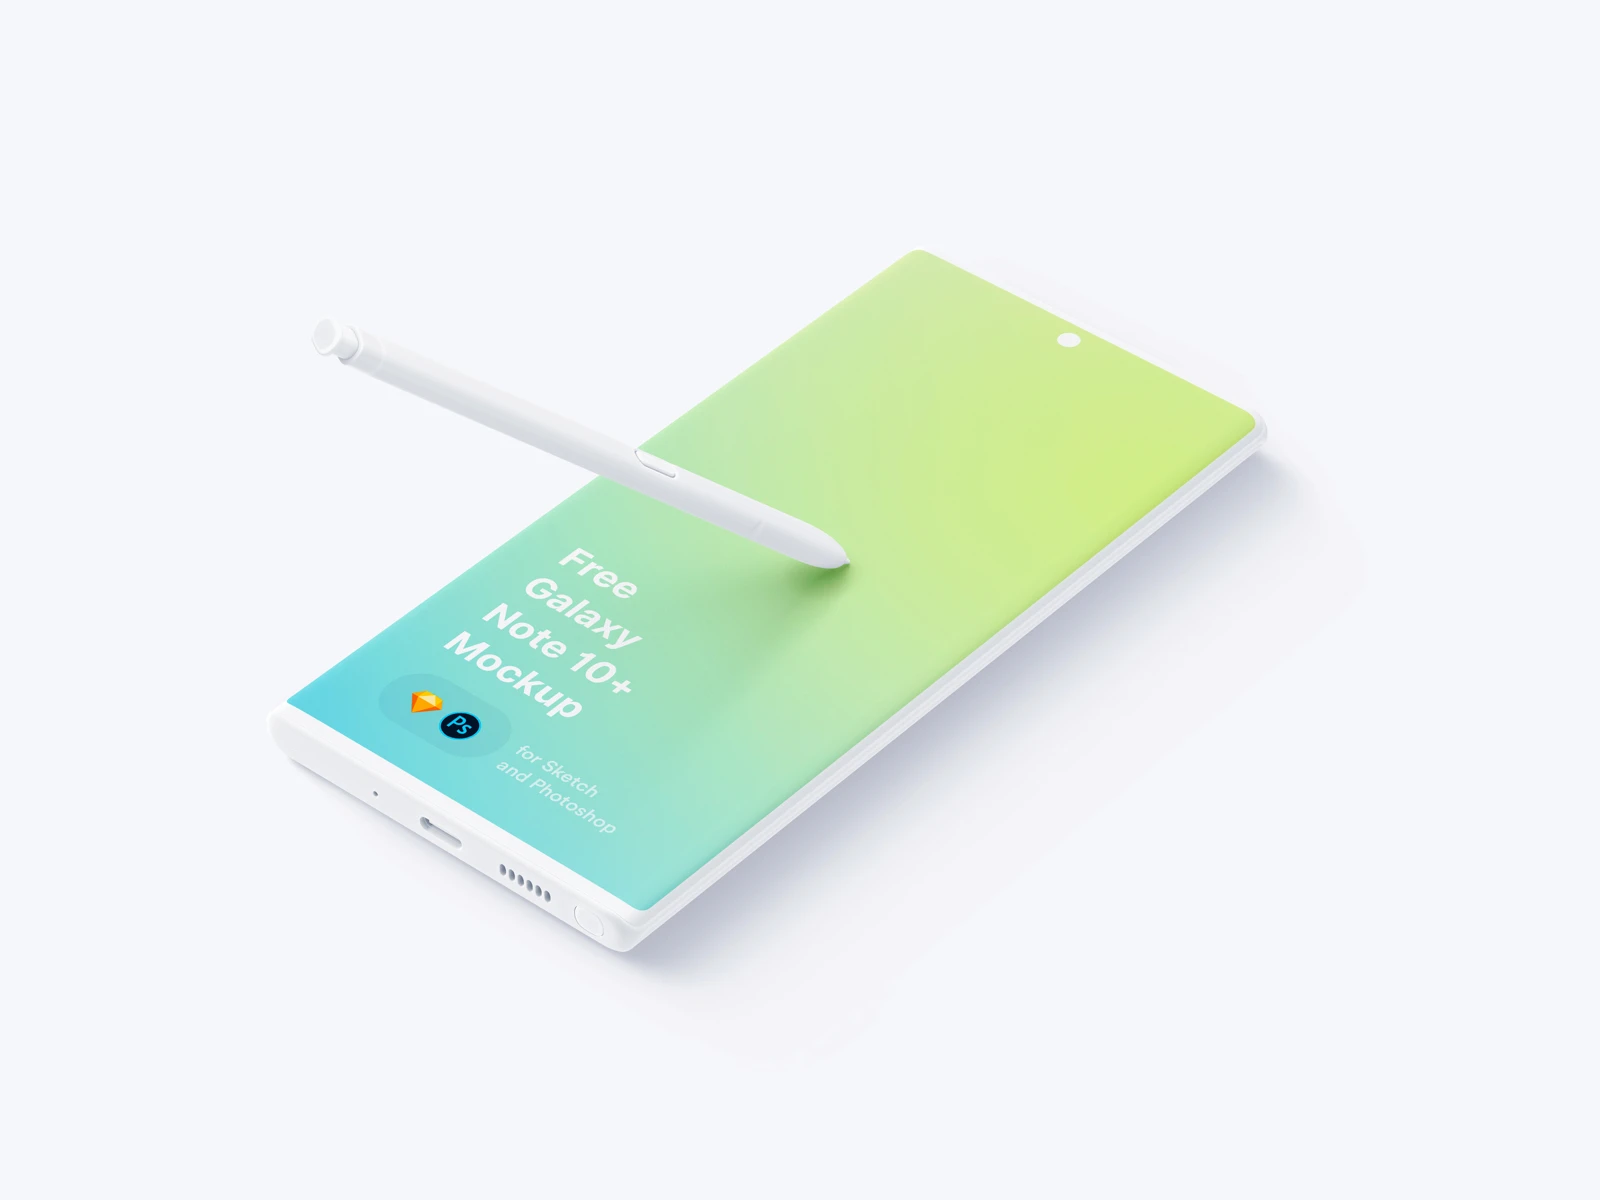 Samsung Galaxy Note 10 Plus Mockup - Download free Samsung Galaxy Note Plus Mockup. For your personal and commercial projects. In thee different variations and isolated pen. Clay versions also included.